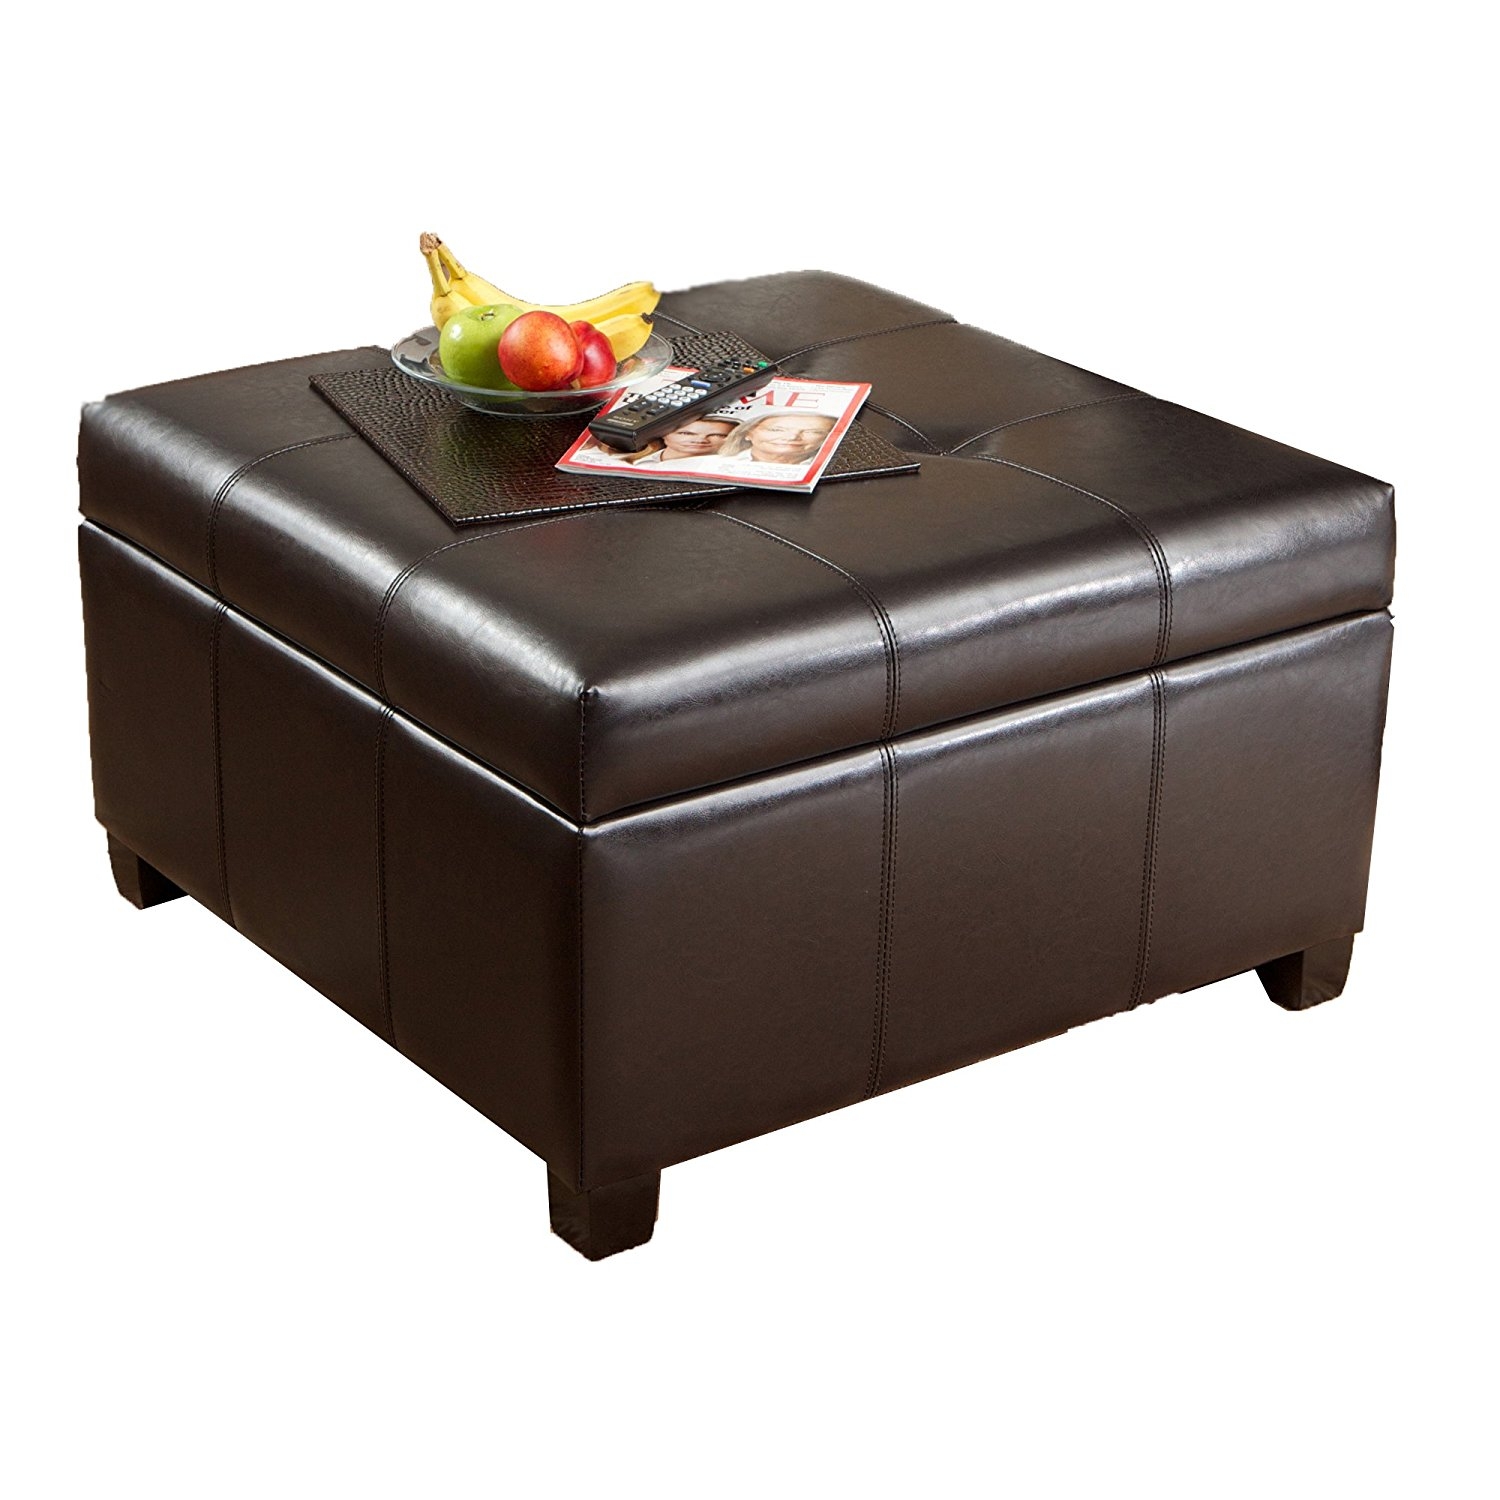 Square Leather Ottoman Coffee Table Youll Love In 2021 Visualhunt